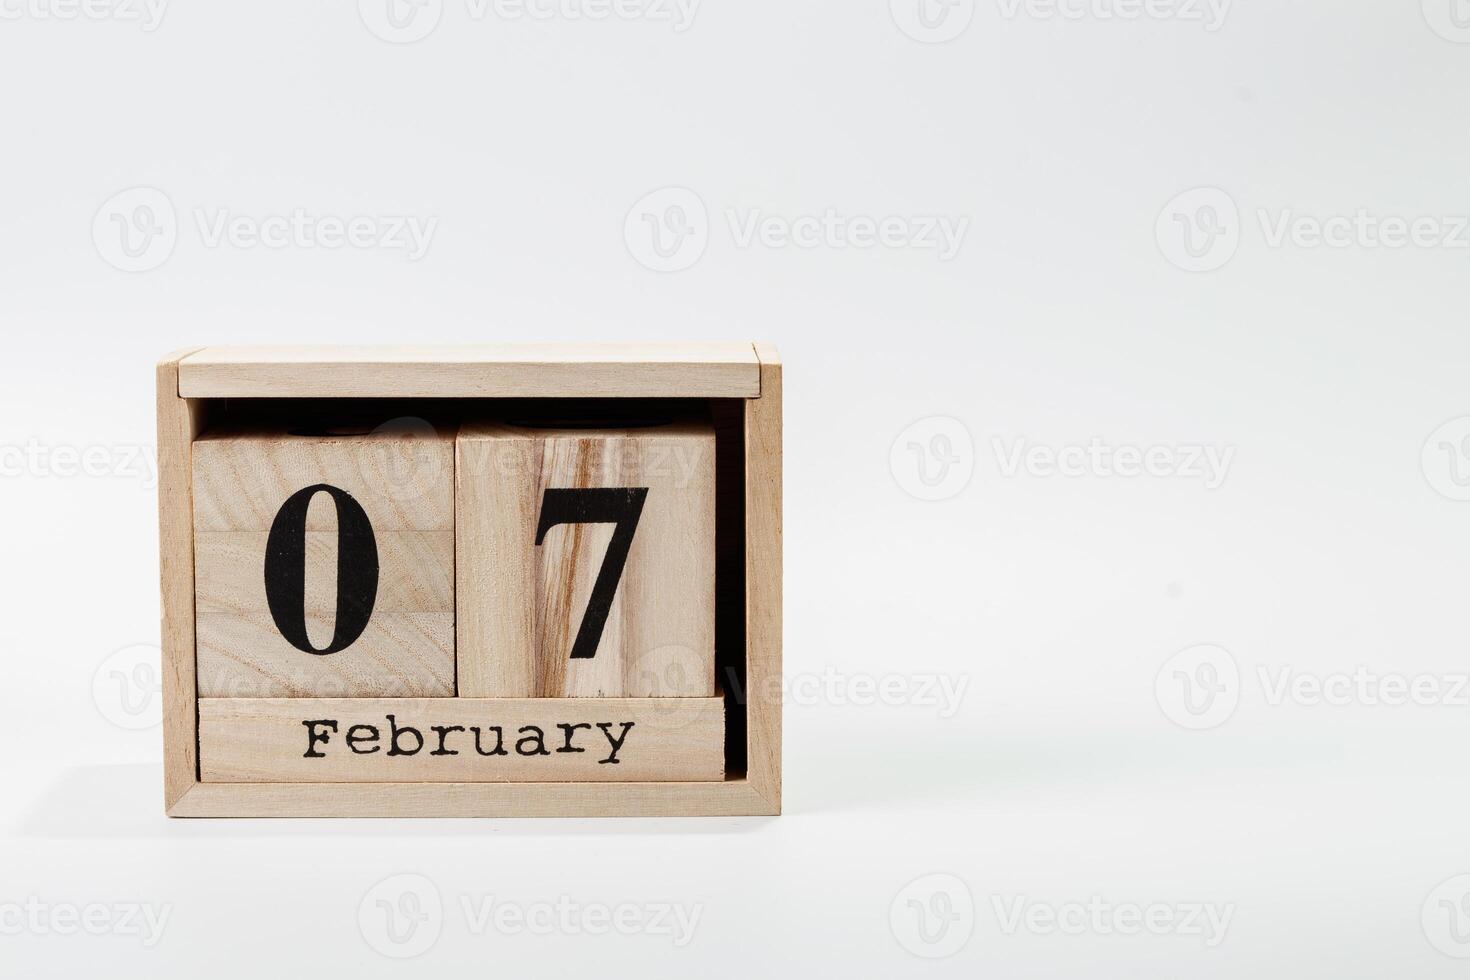 Wooden calendar February 07 on a white background photo